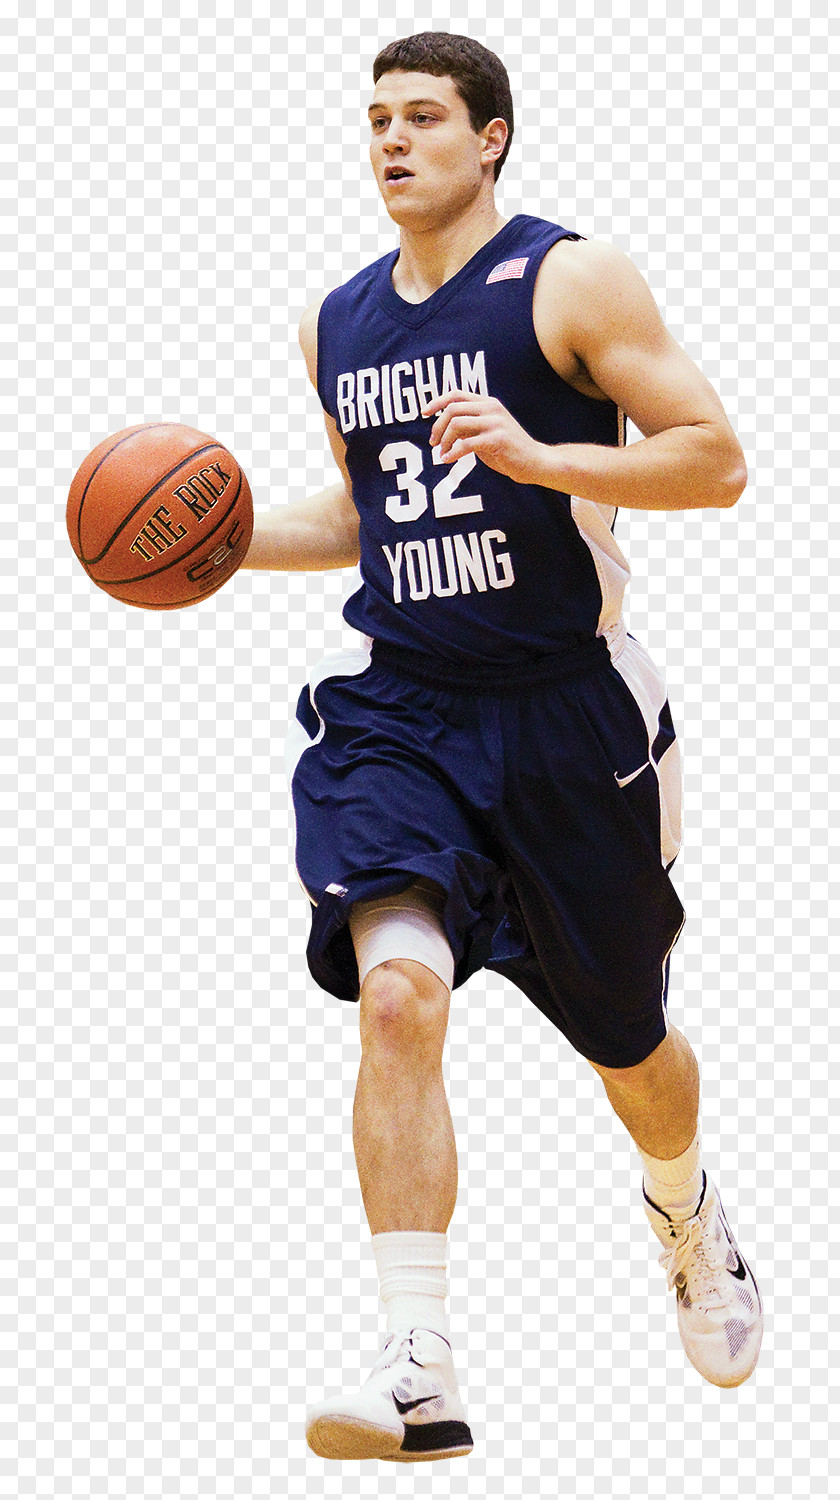 Basketball Jimmer Fredette Player PCD Pharma Franchise Serbia Molecules Private Limited Brigham Young University PNG